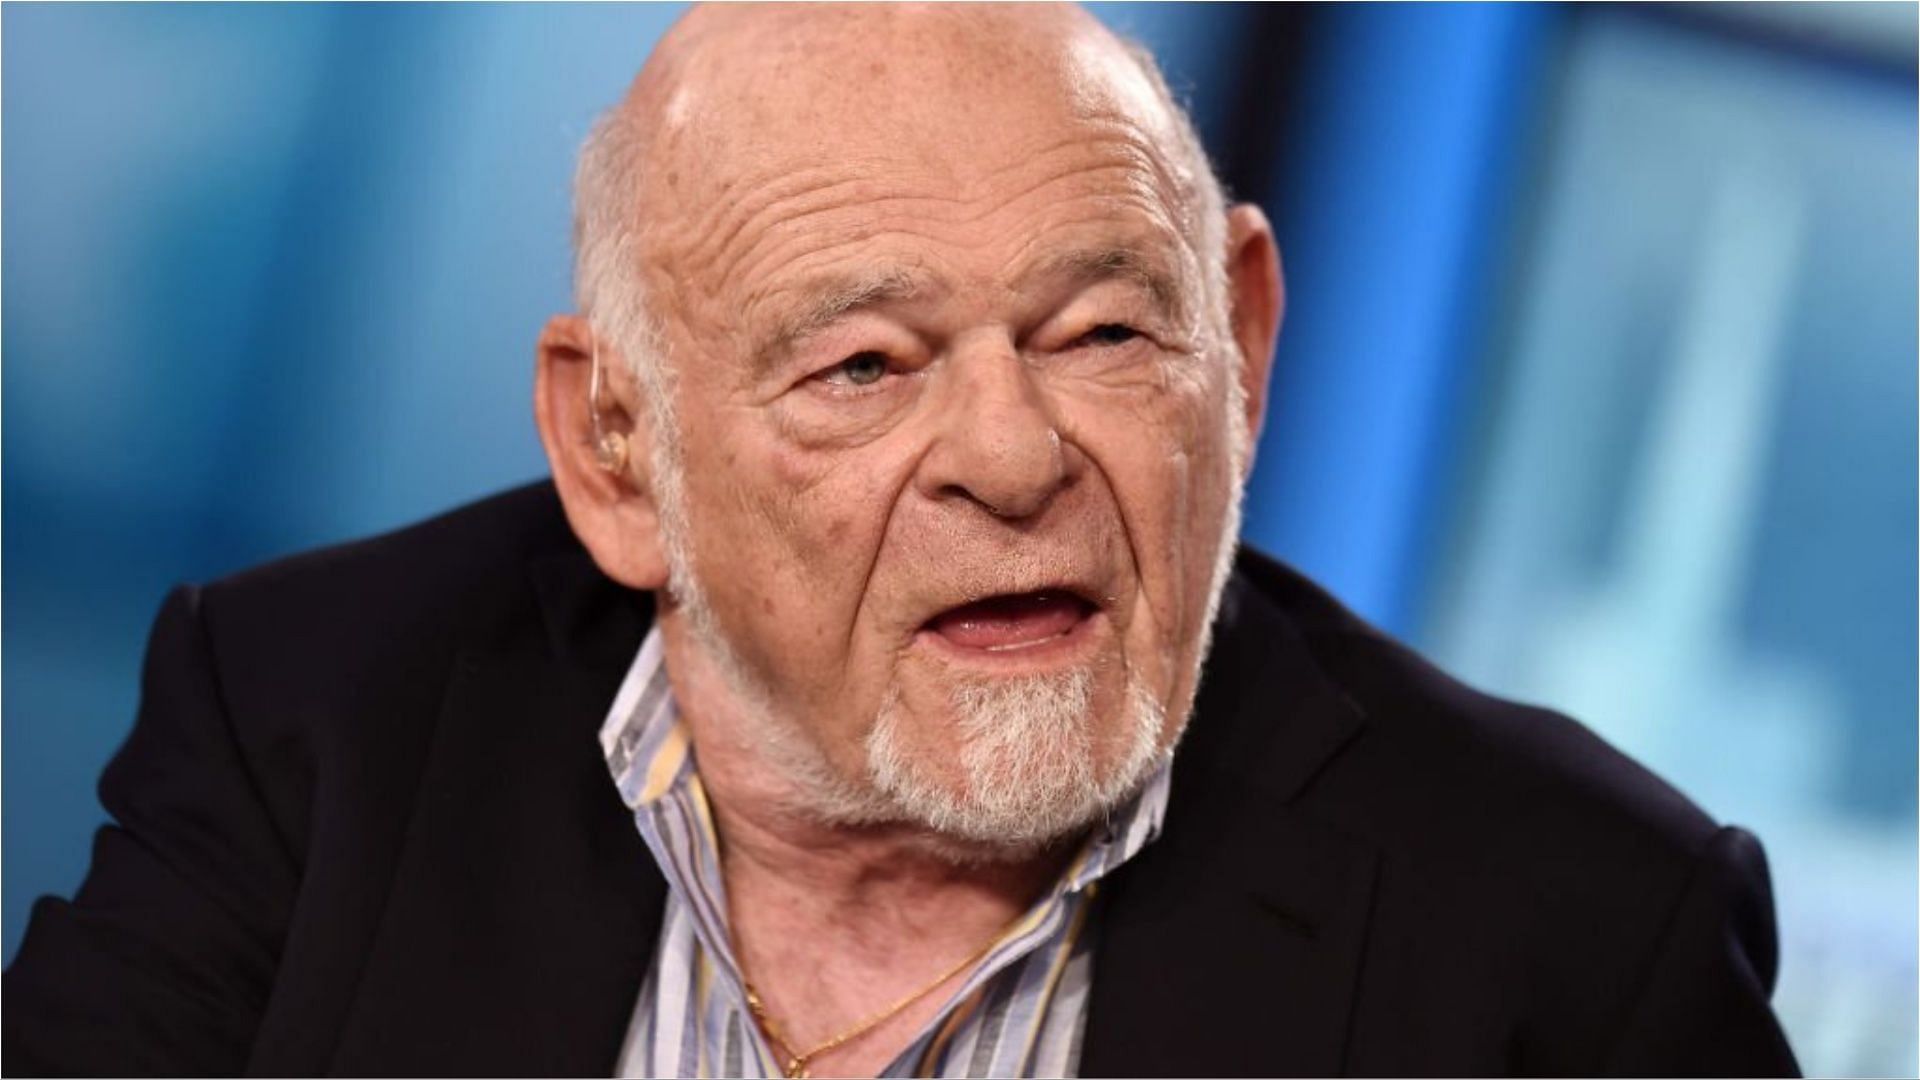 Sam Zell recently died at the age of 81 (Image via Steven Ferdman/Getty Images)